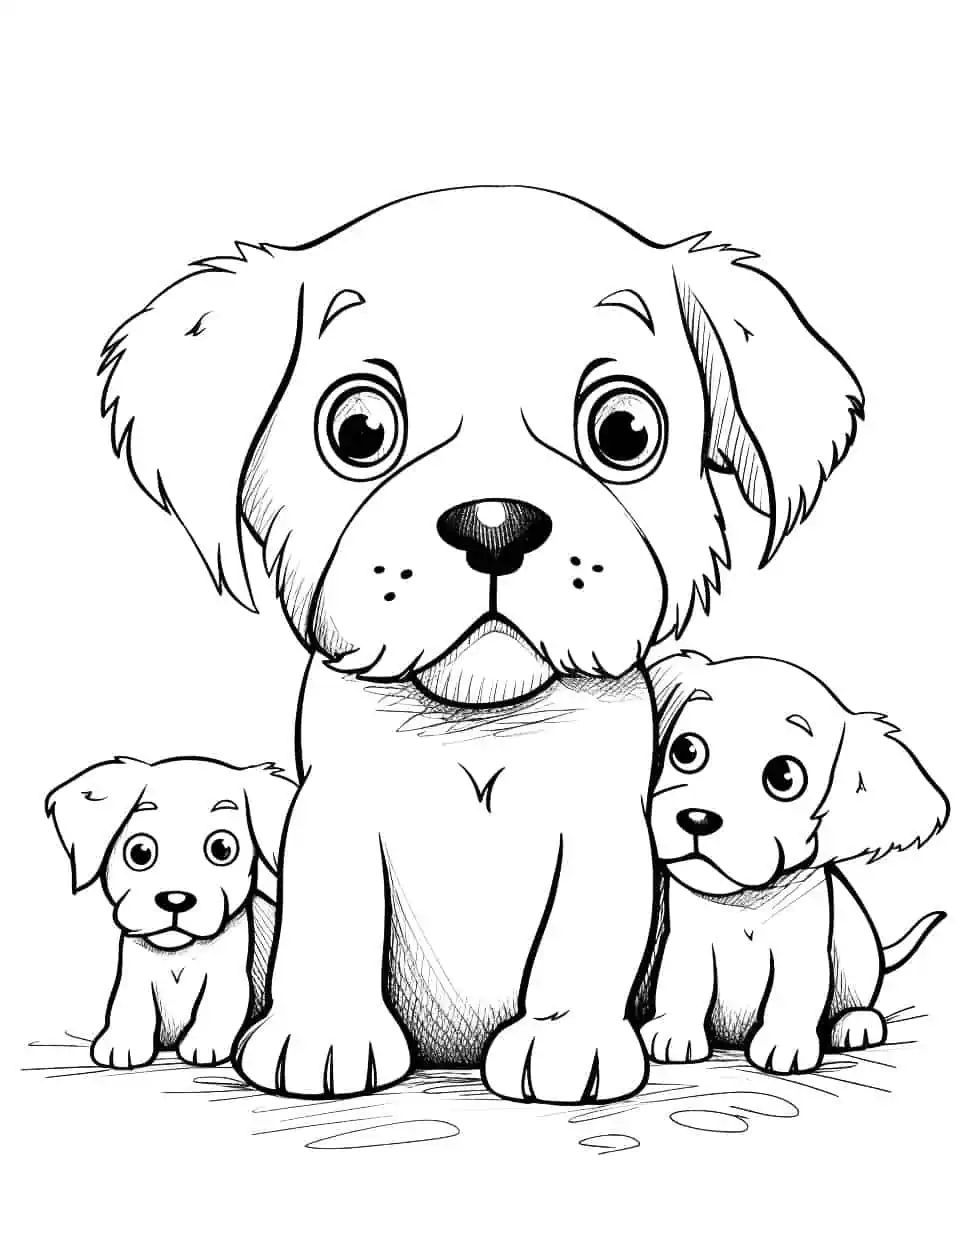 Baby Dog with Family Coloring Page - A baby dog playing with its siblings under the watchful eyes of their mother.